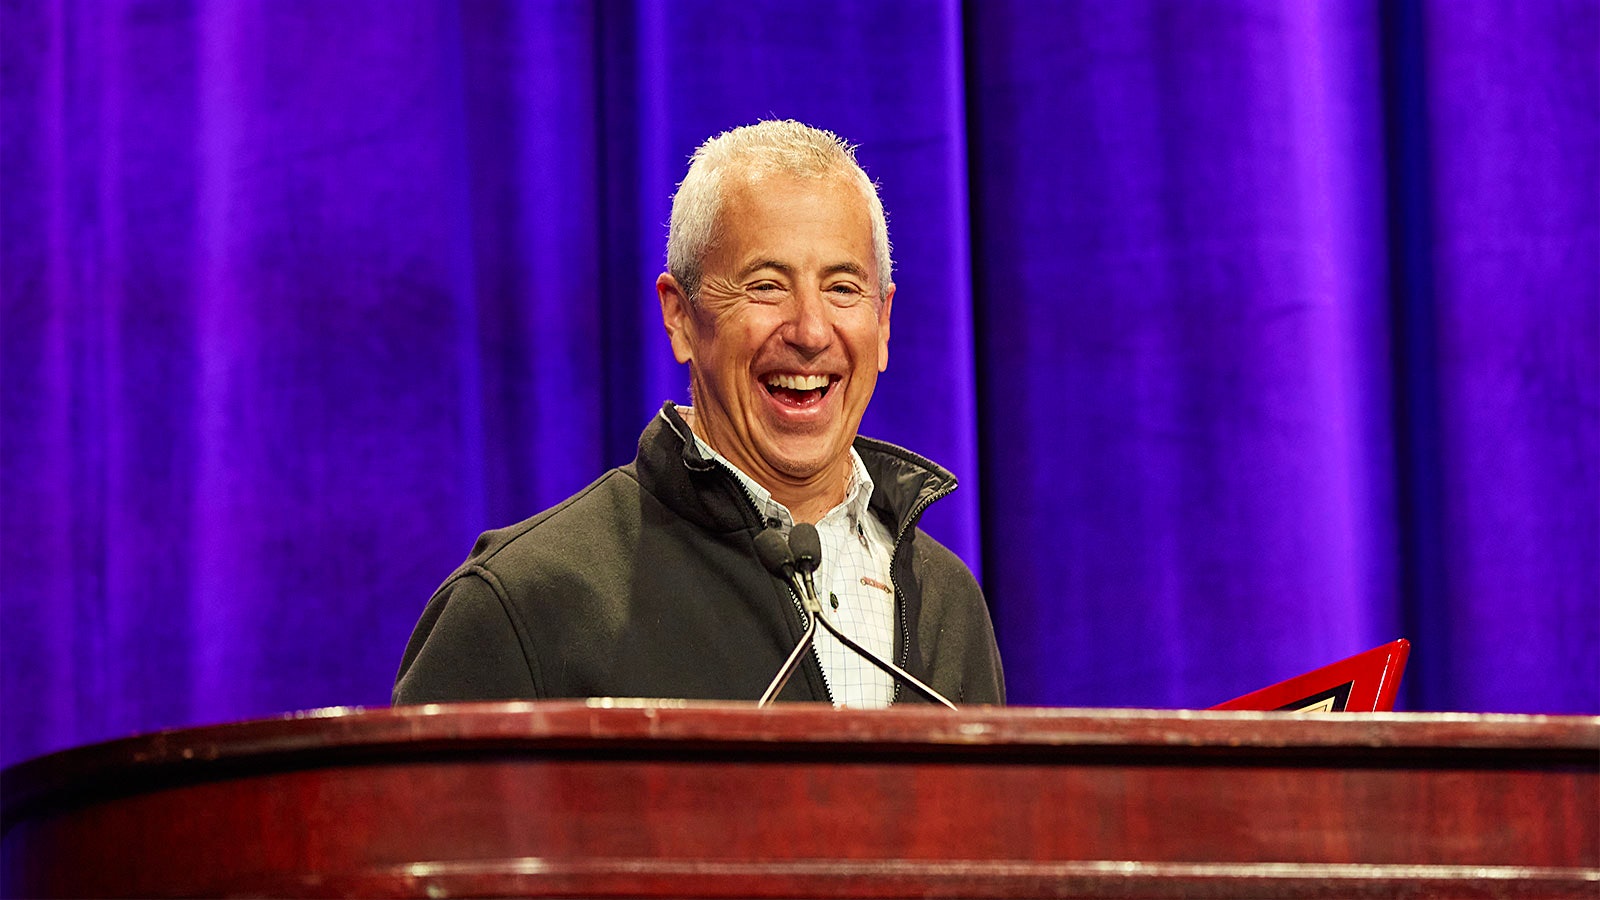  Restaurateur Danny Meyer at the Wine Experience podium with a big smile on his face